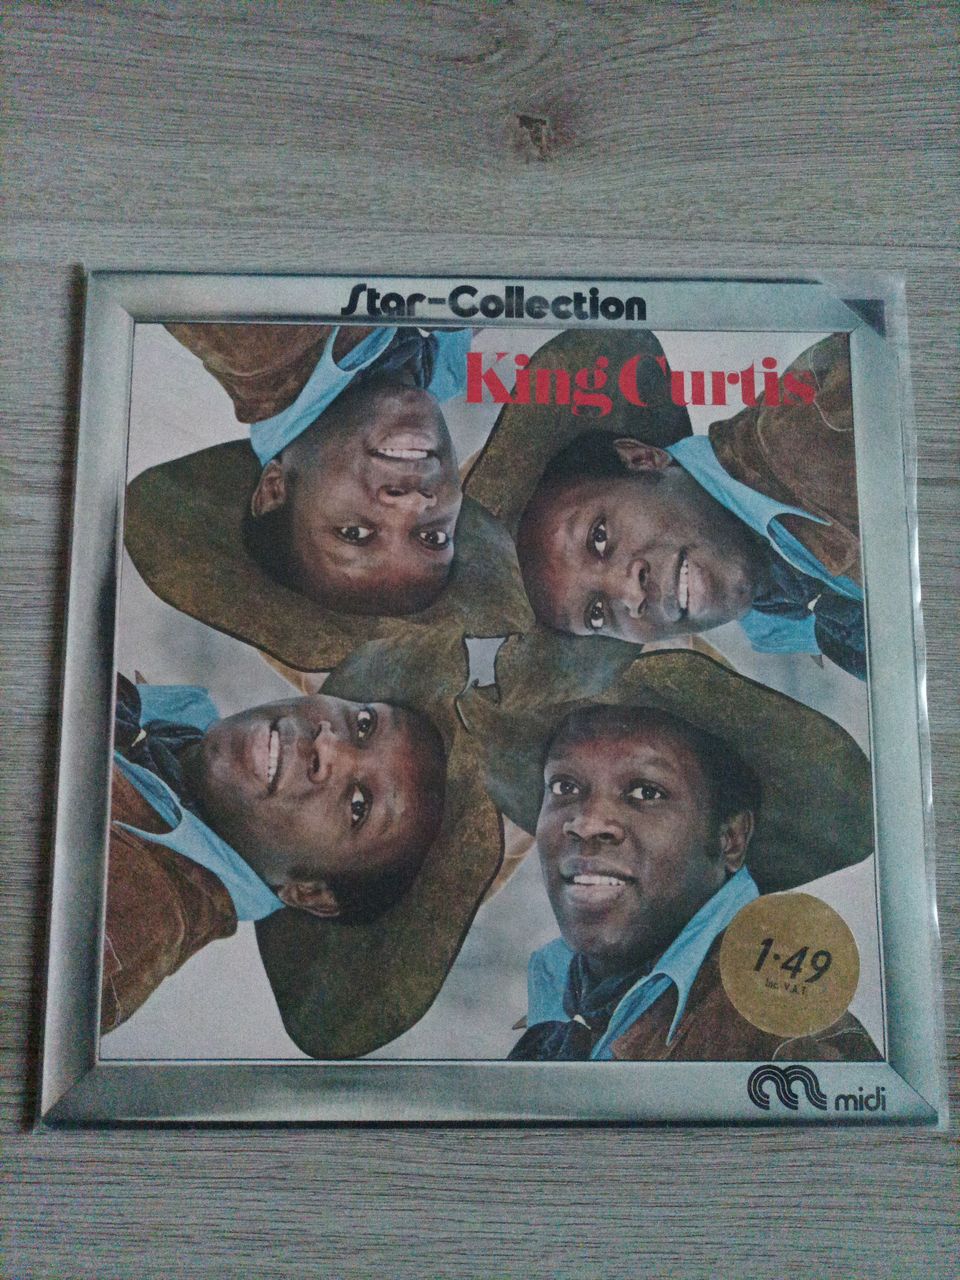 LP King Curtis - Star-Collection